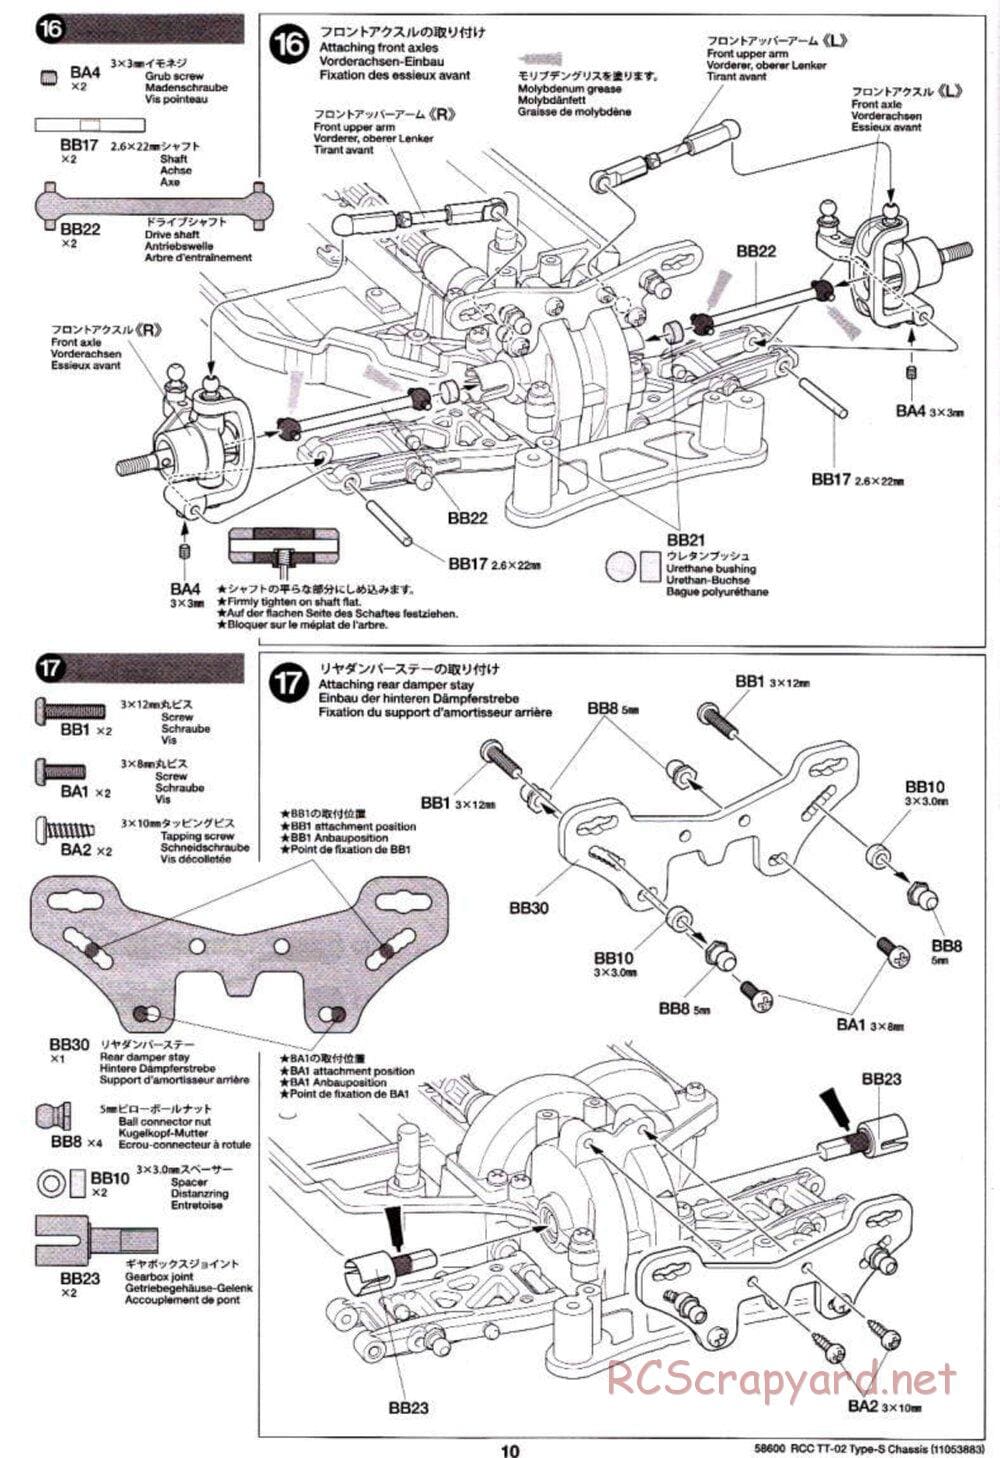 Tamiya - TT-02 Type-S Chassis - Manual - Page 10